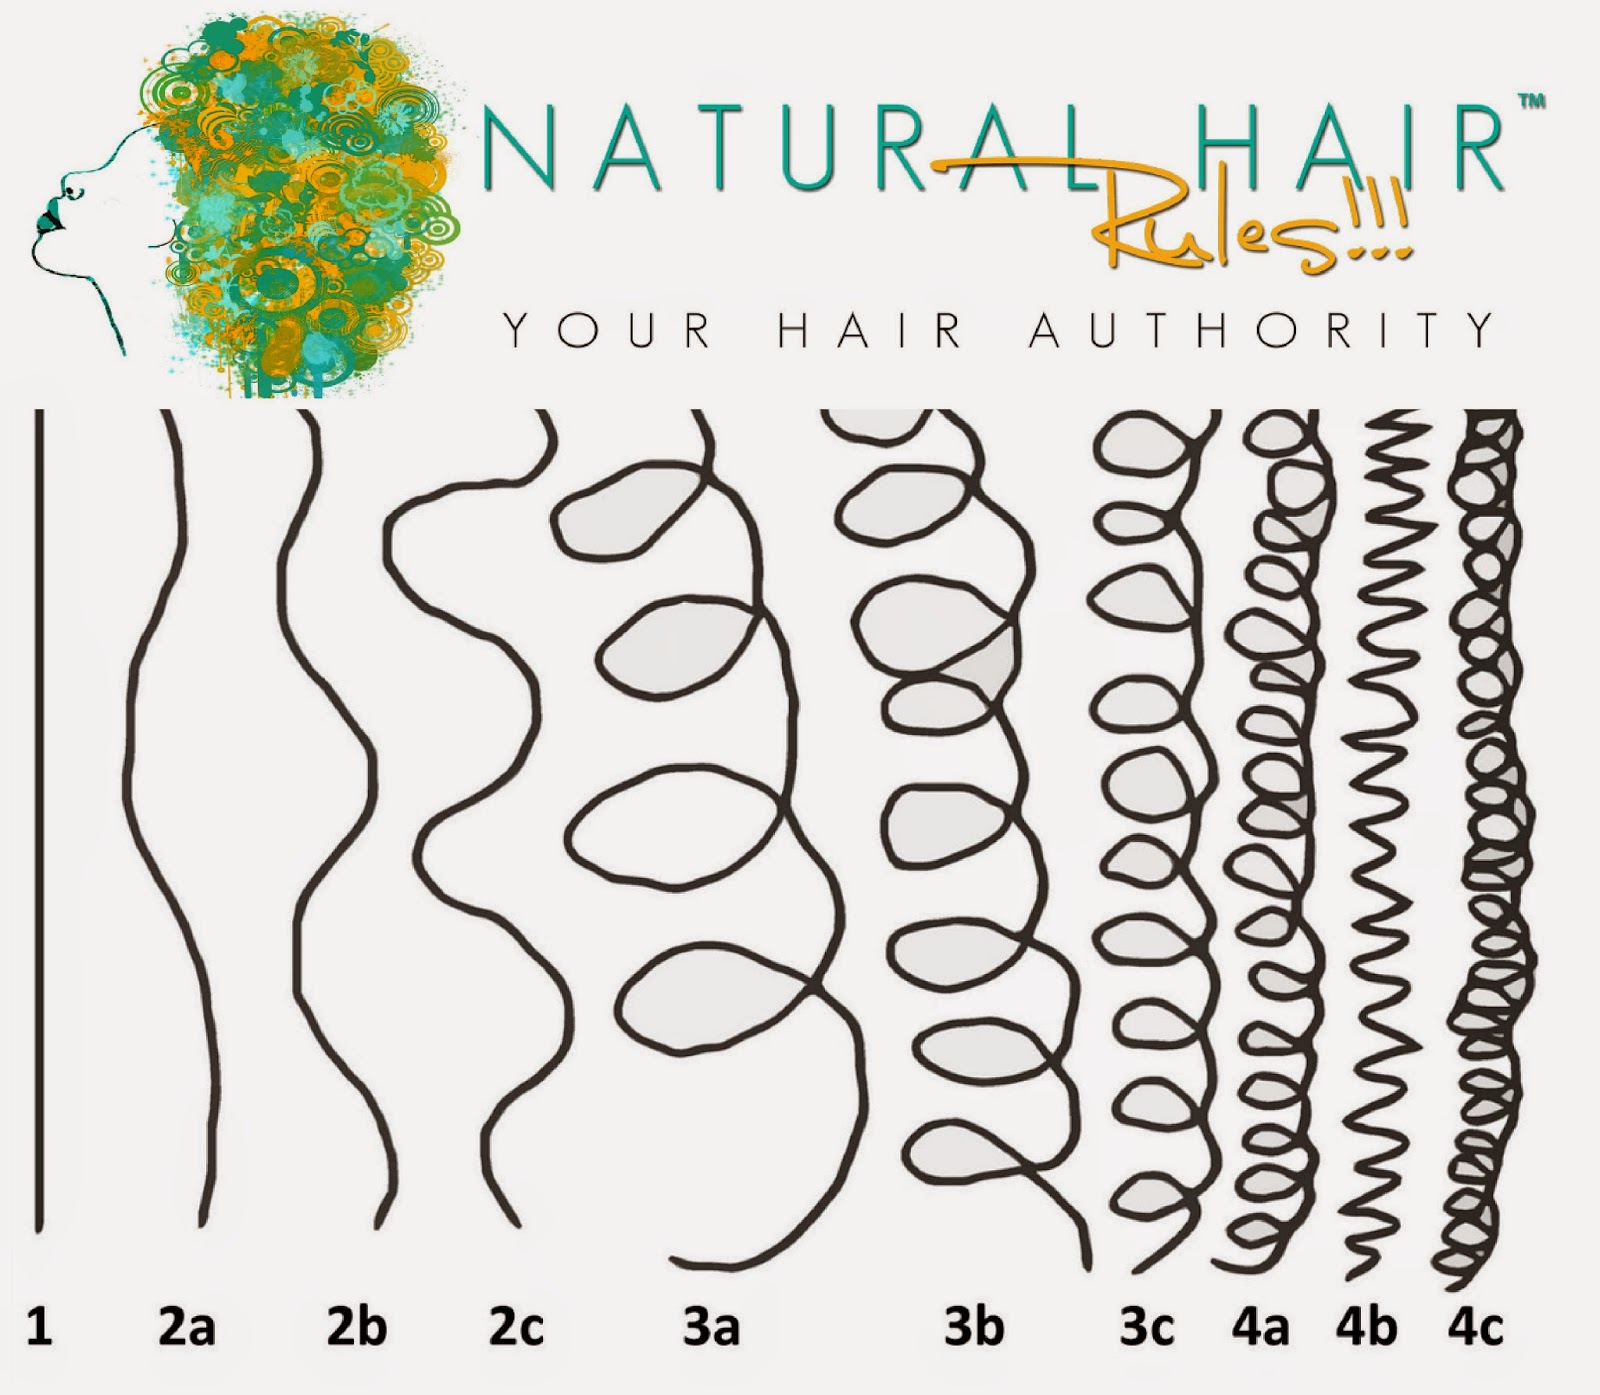 Desire My Natural!: Hair Tests | Vol. 1.2 What Is My Hair ...